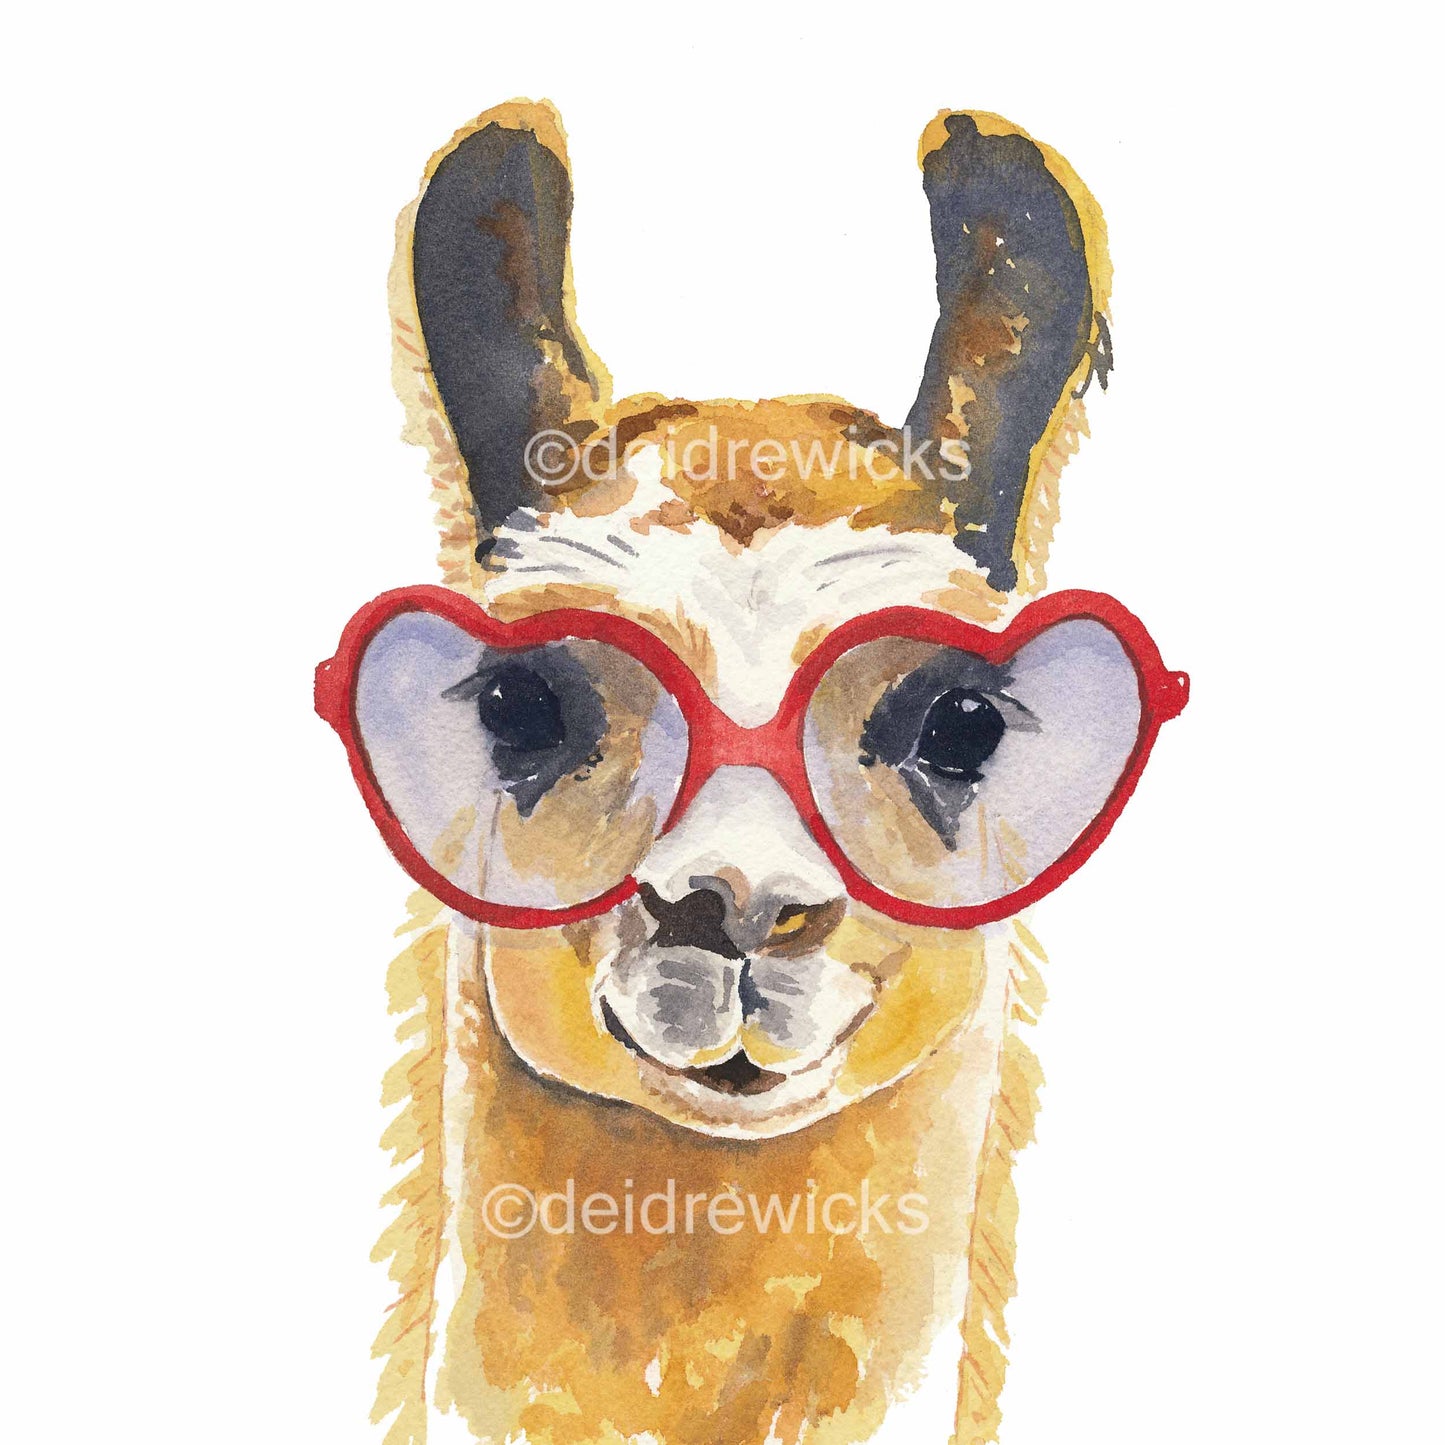 Watercolour painting of a llama wearing heart shaped glasses